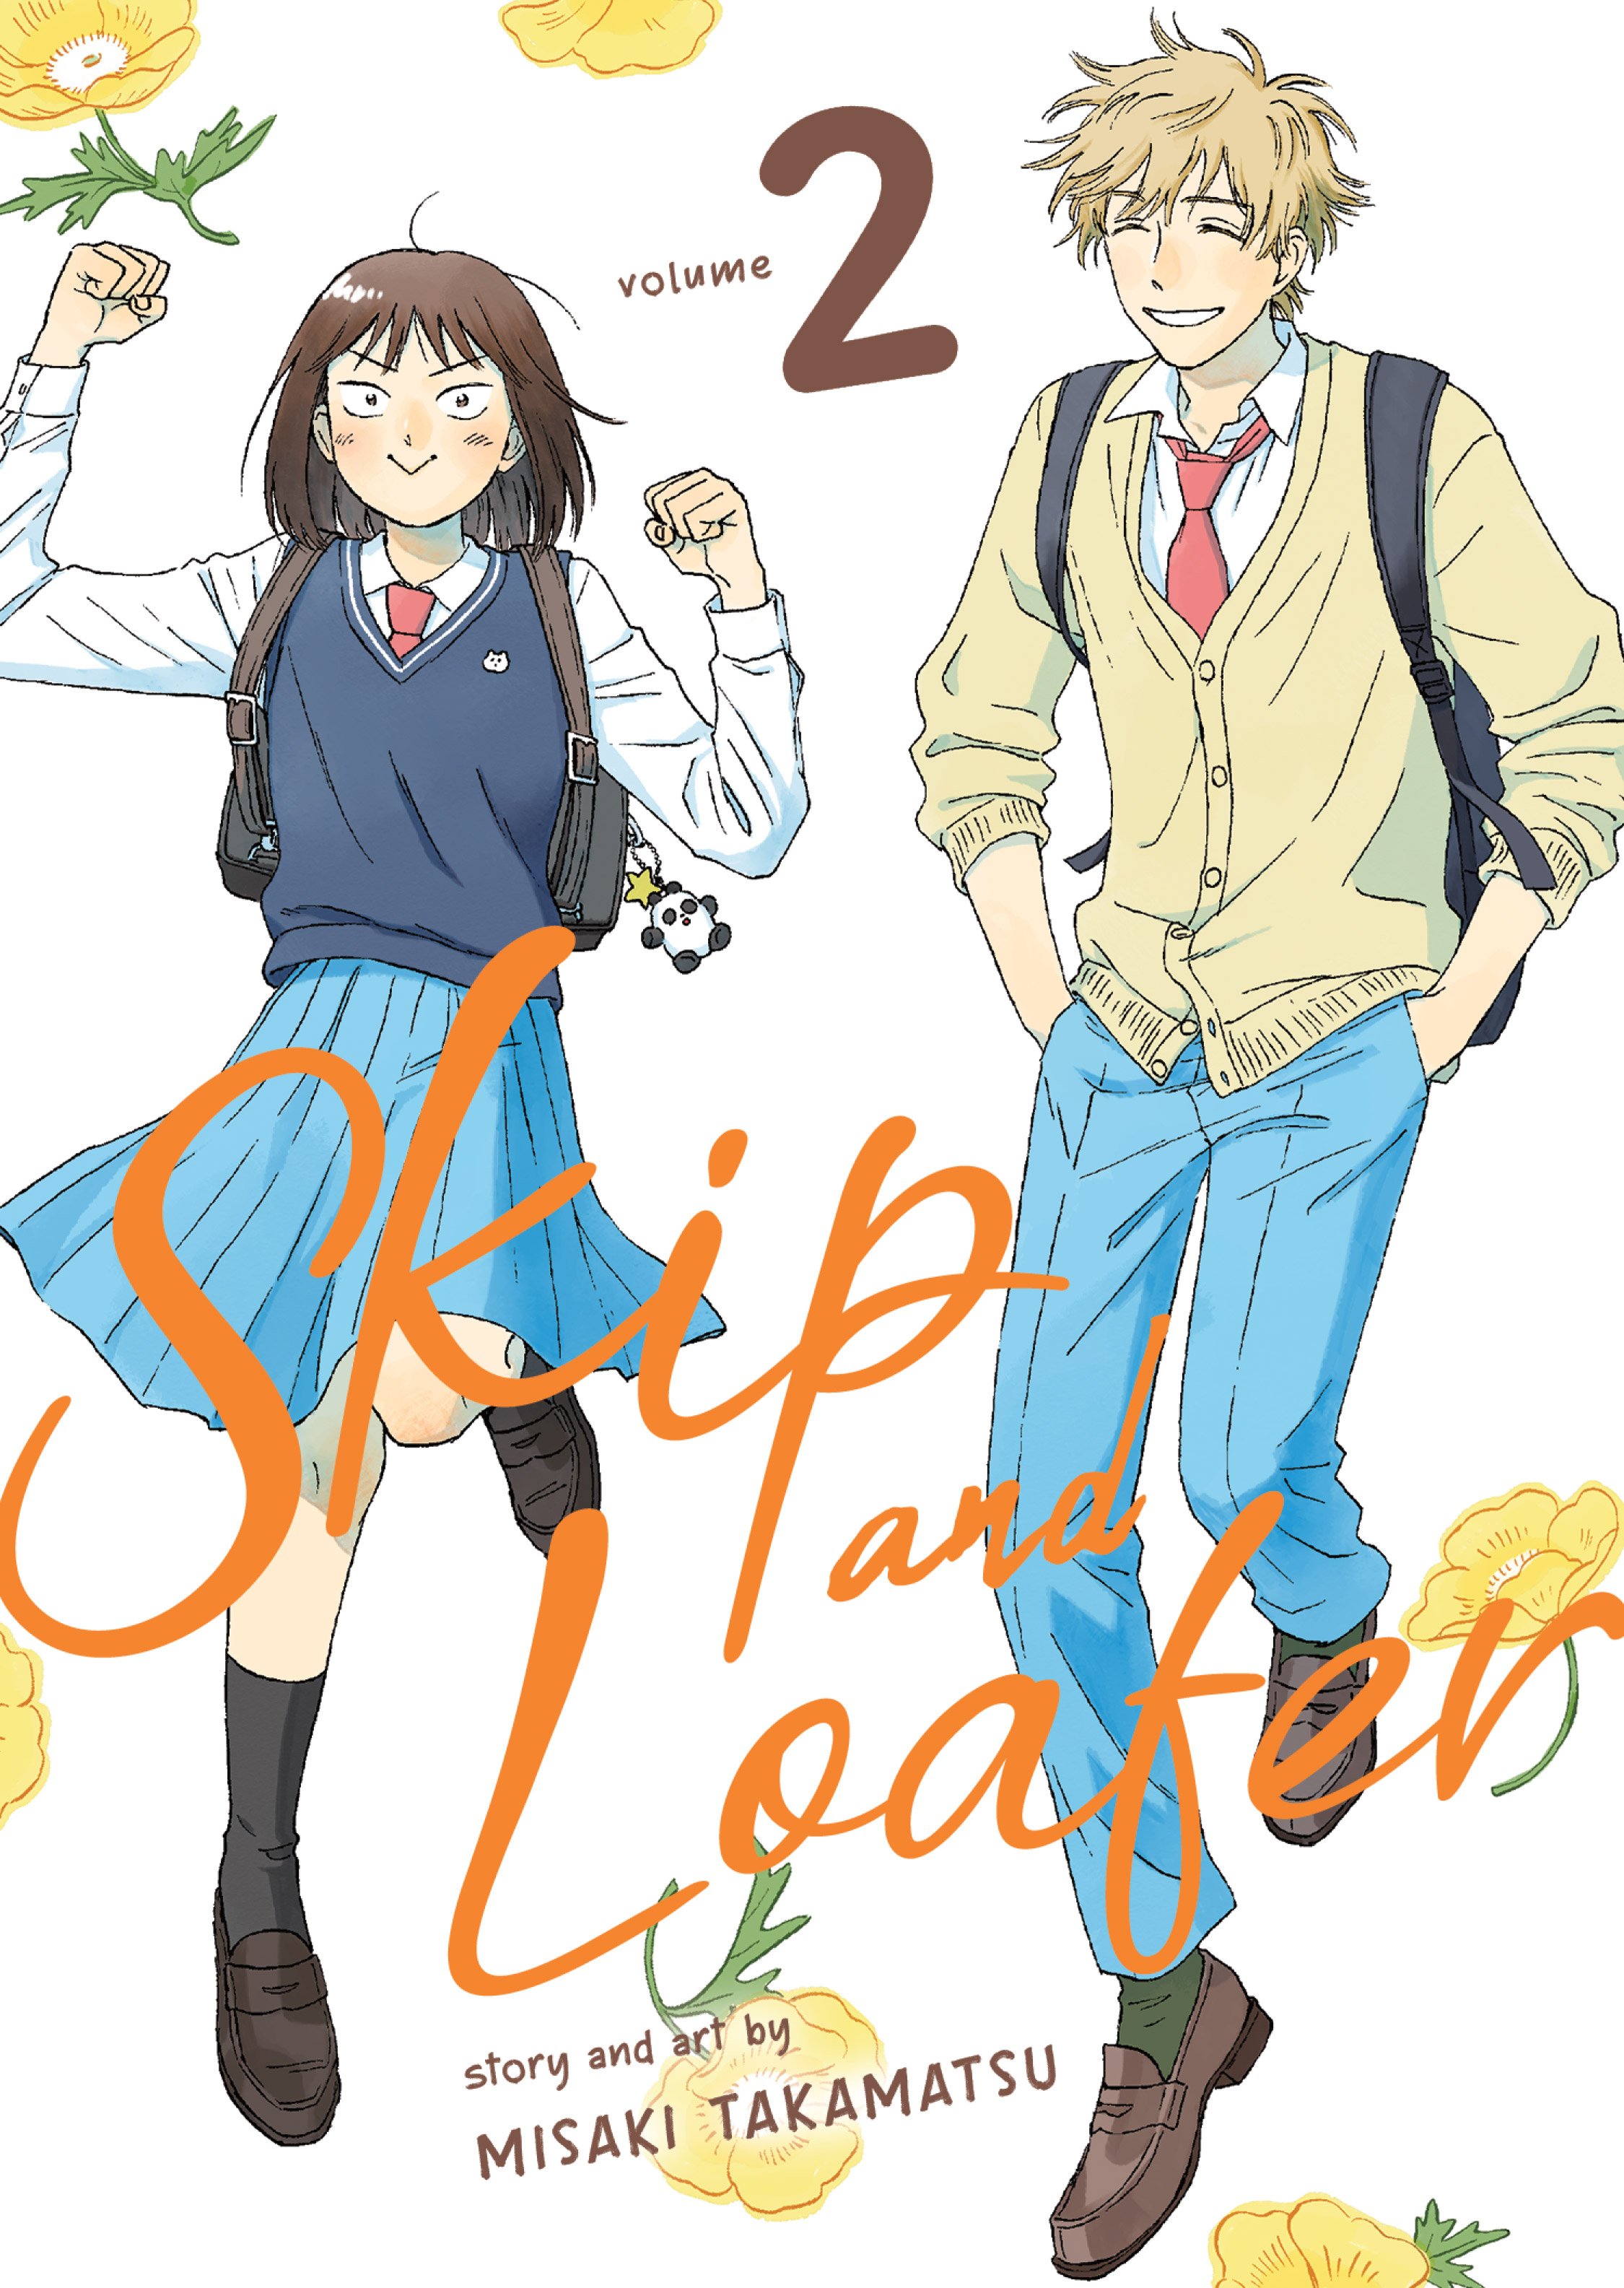 Skip and Loafer Episode 12 Release Date & Time